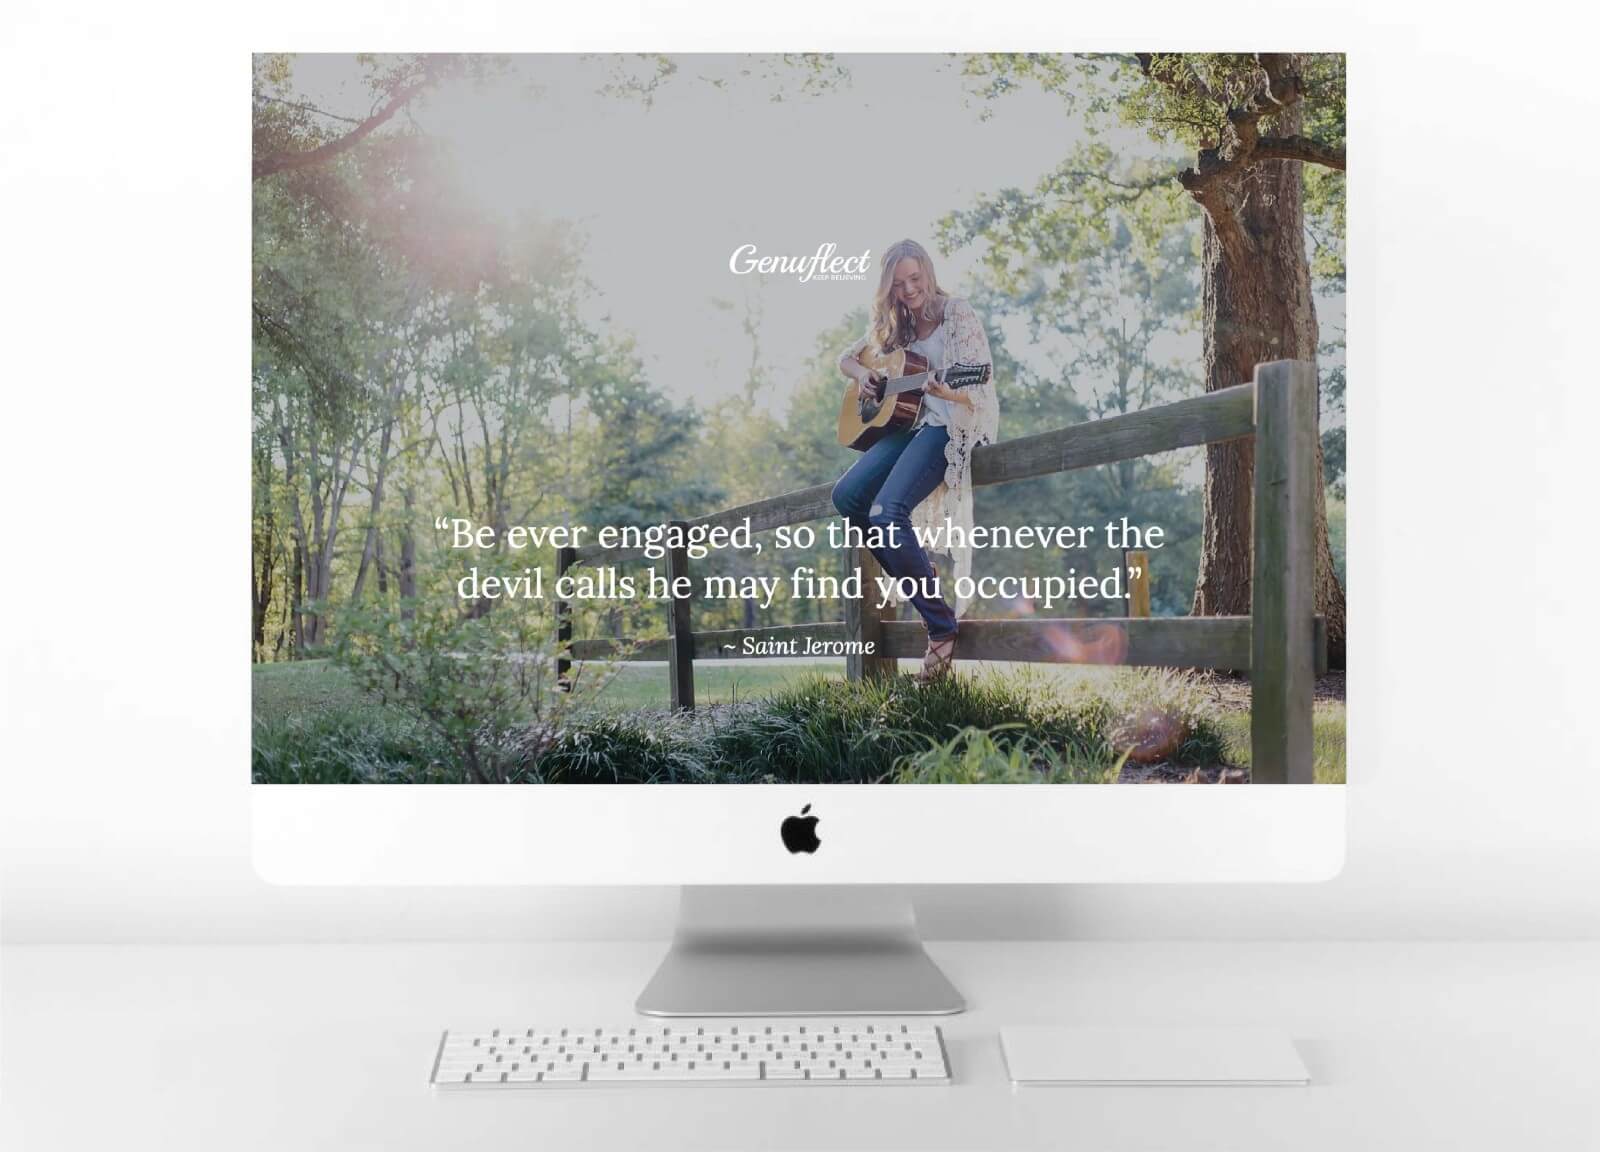 Genuflect image on computer background of Woman outside sitting on a fence playing the guitar with the sun shining down on her